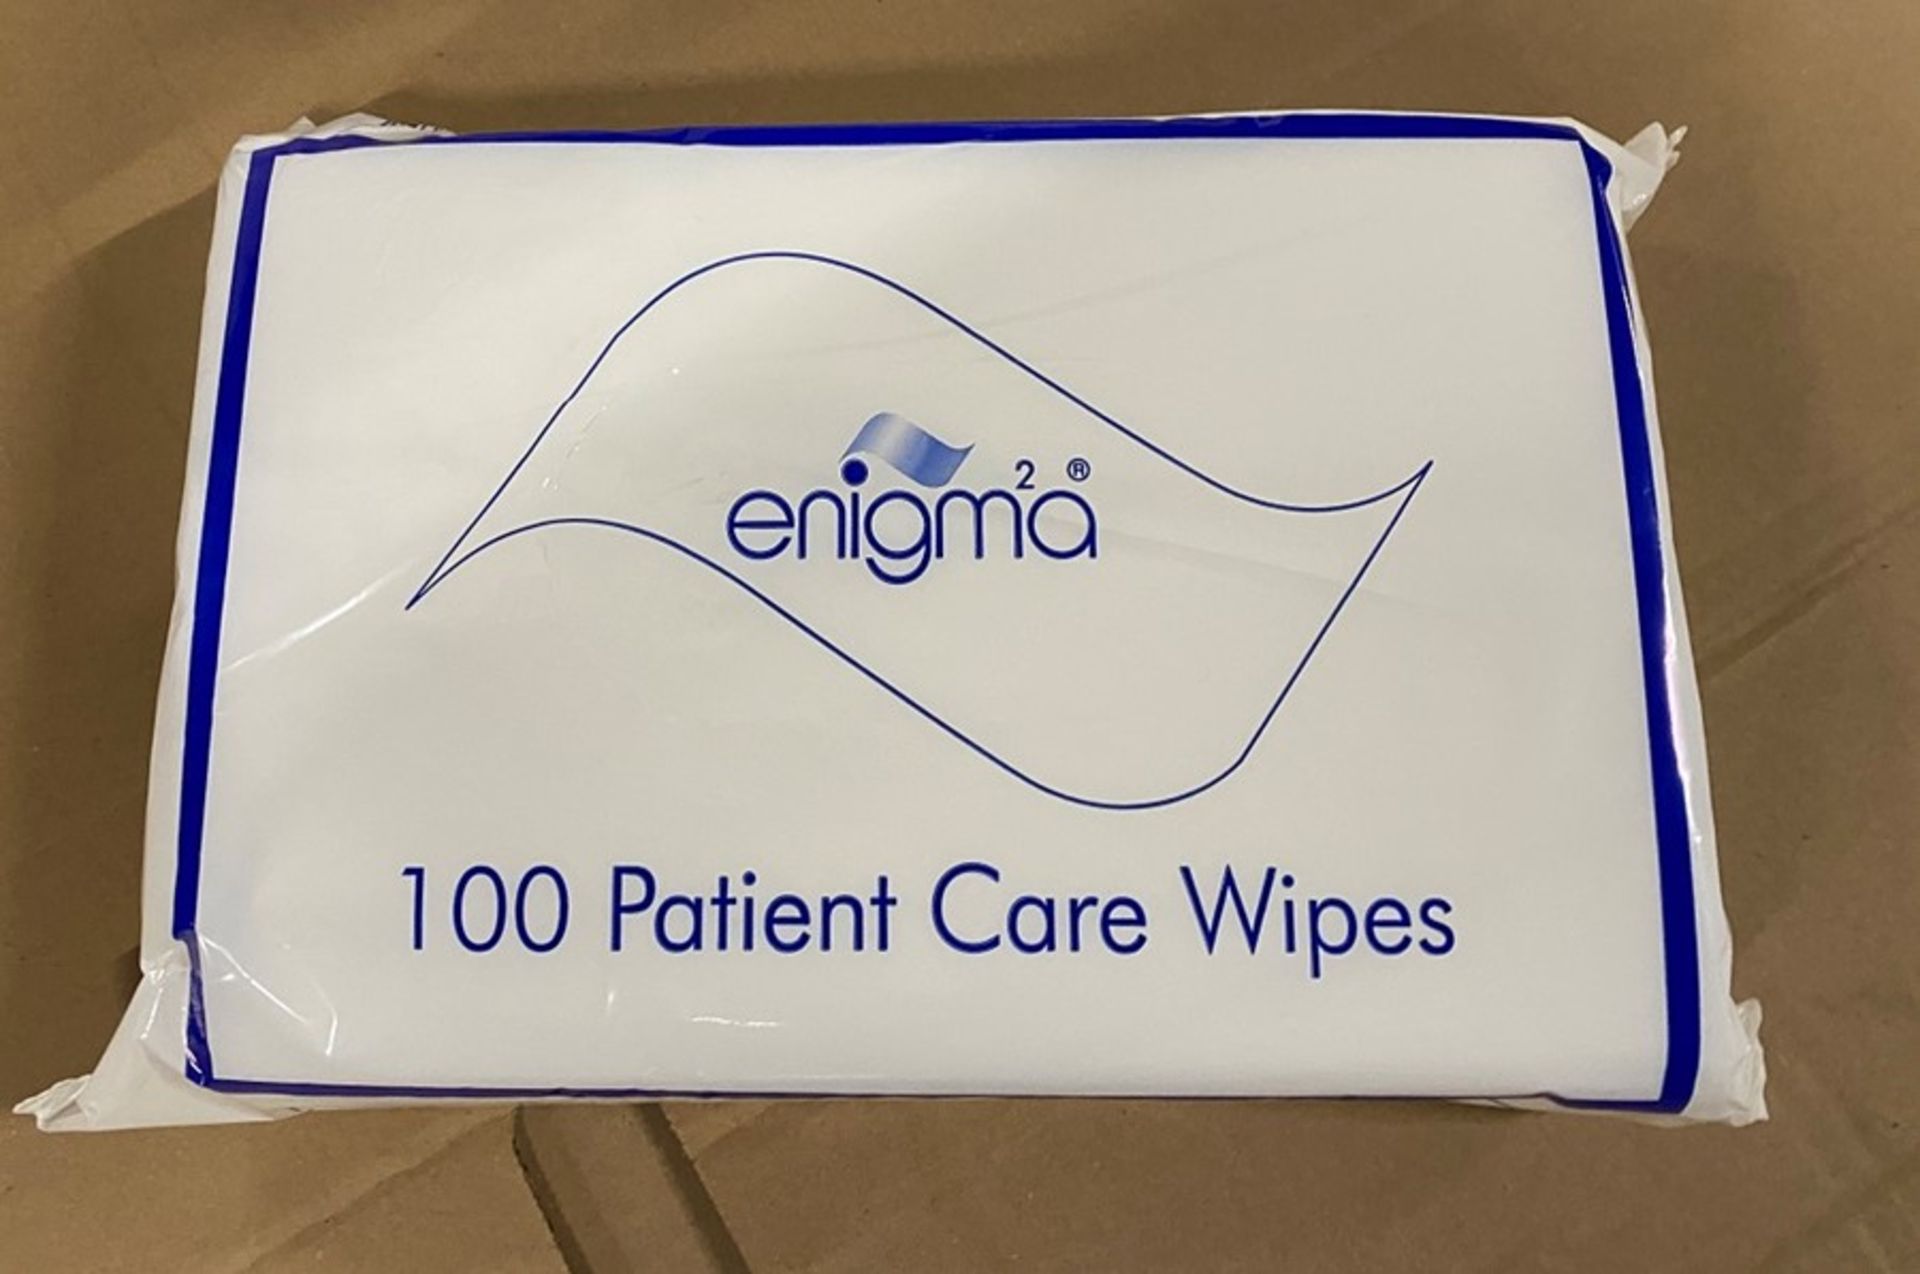 1 BOXED 12 PACK OF ENIGMA PATIENT CARE WIPES (100 WIPES PER PACK) / RRP £40.00 (PUBLIC VIEWING